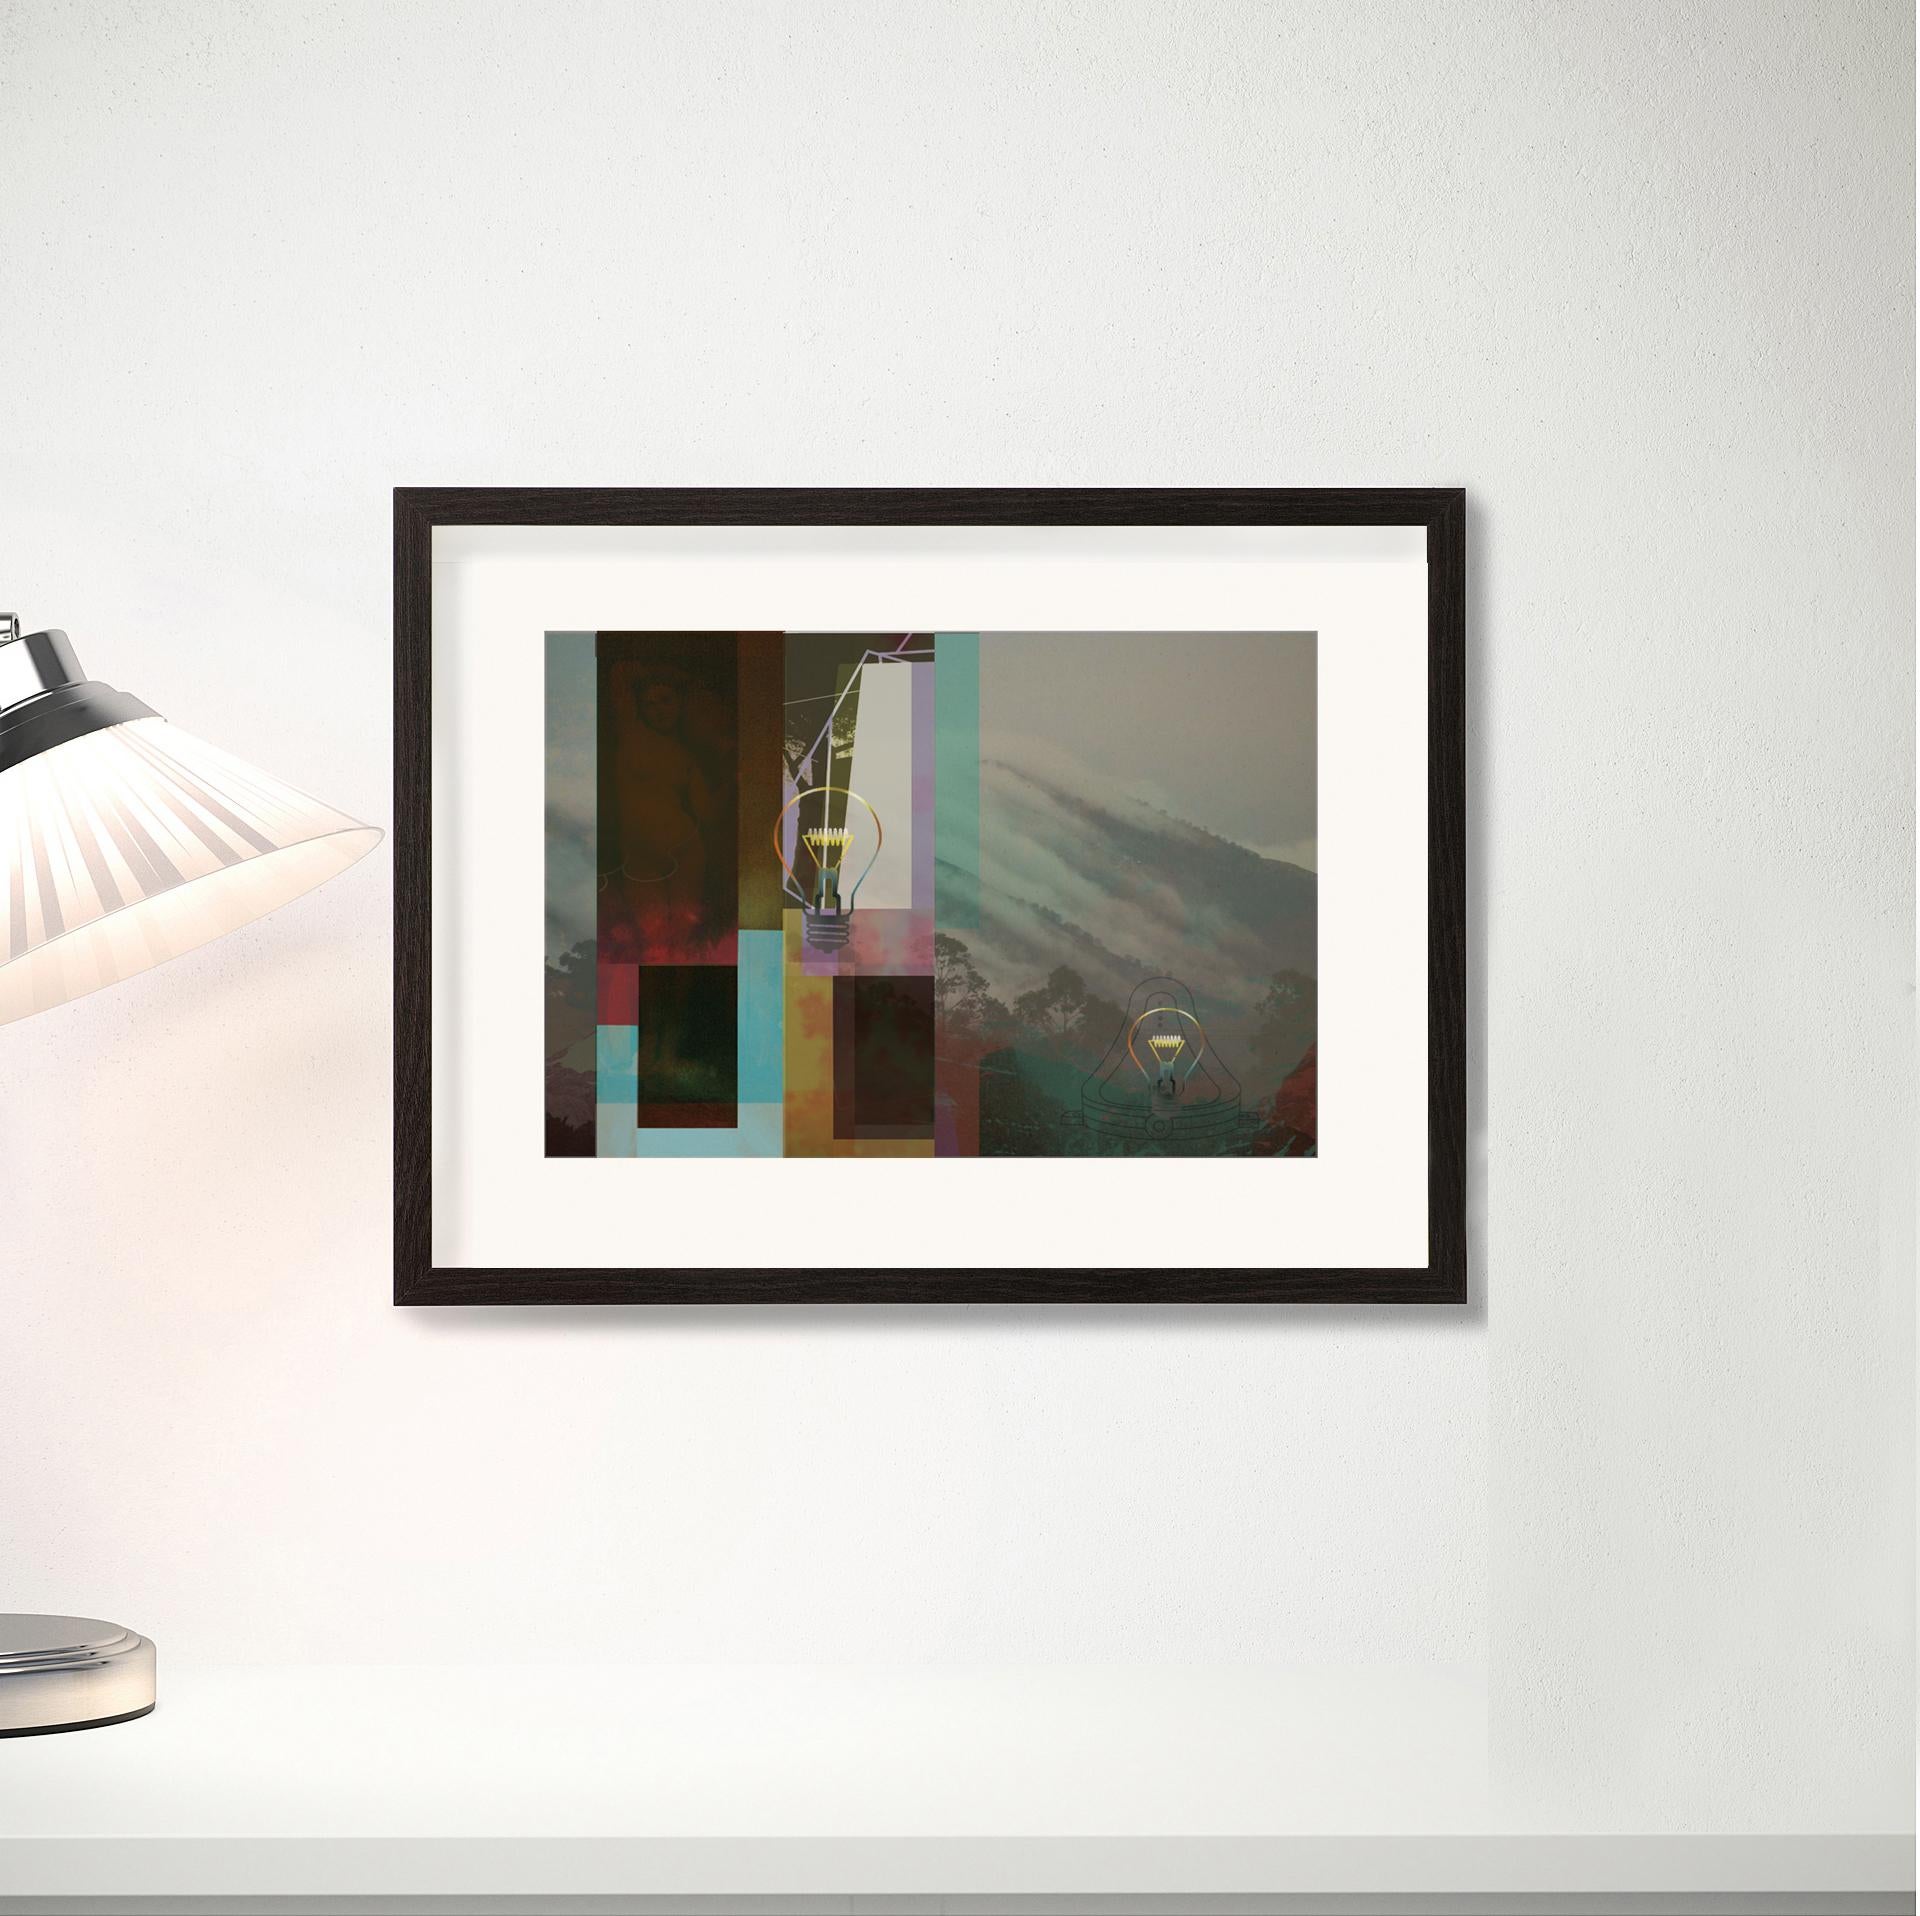 Two Lights At The Mountains, 2018

Digital pigment print Ultrachrome ink on Fabriano Rosaspina paper. Hand signed by the artist, and certificate of authenticity. Edition of 25  (Unframed)

His work has been shown in Reina Sofía Museum of Madrid,